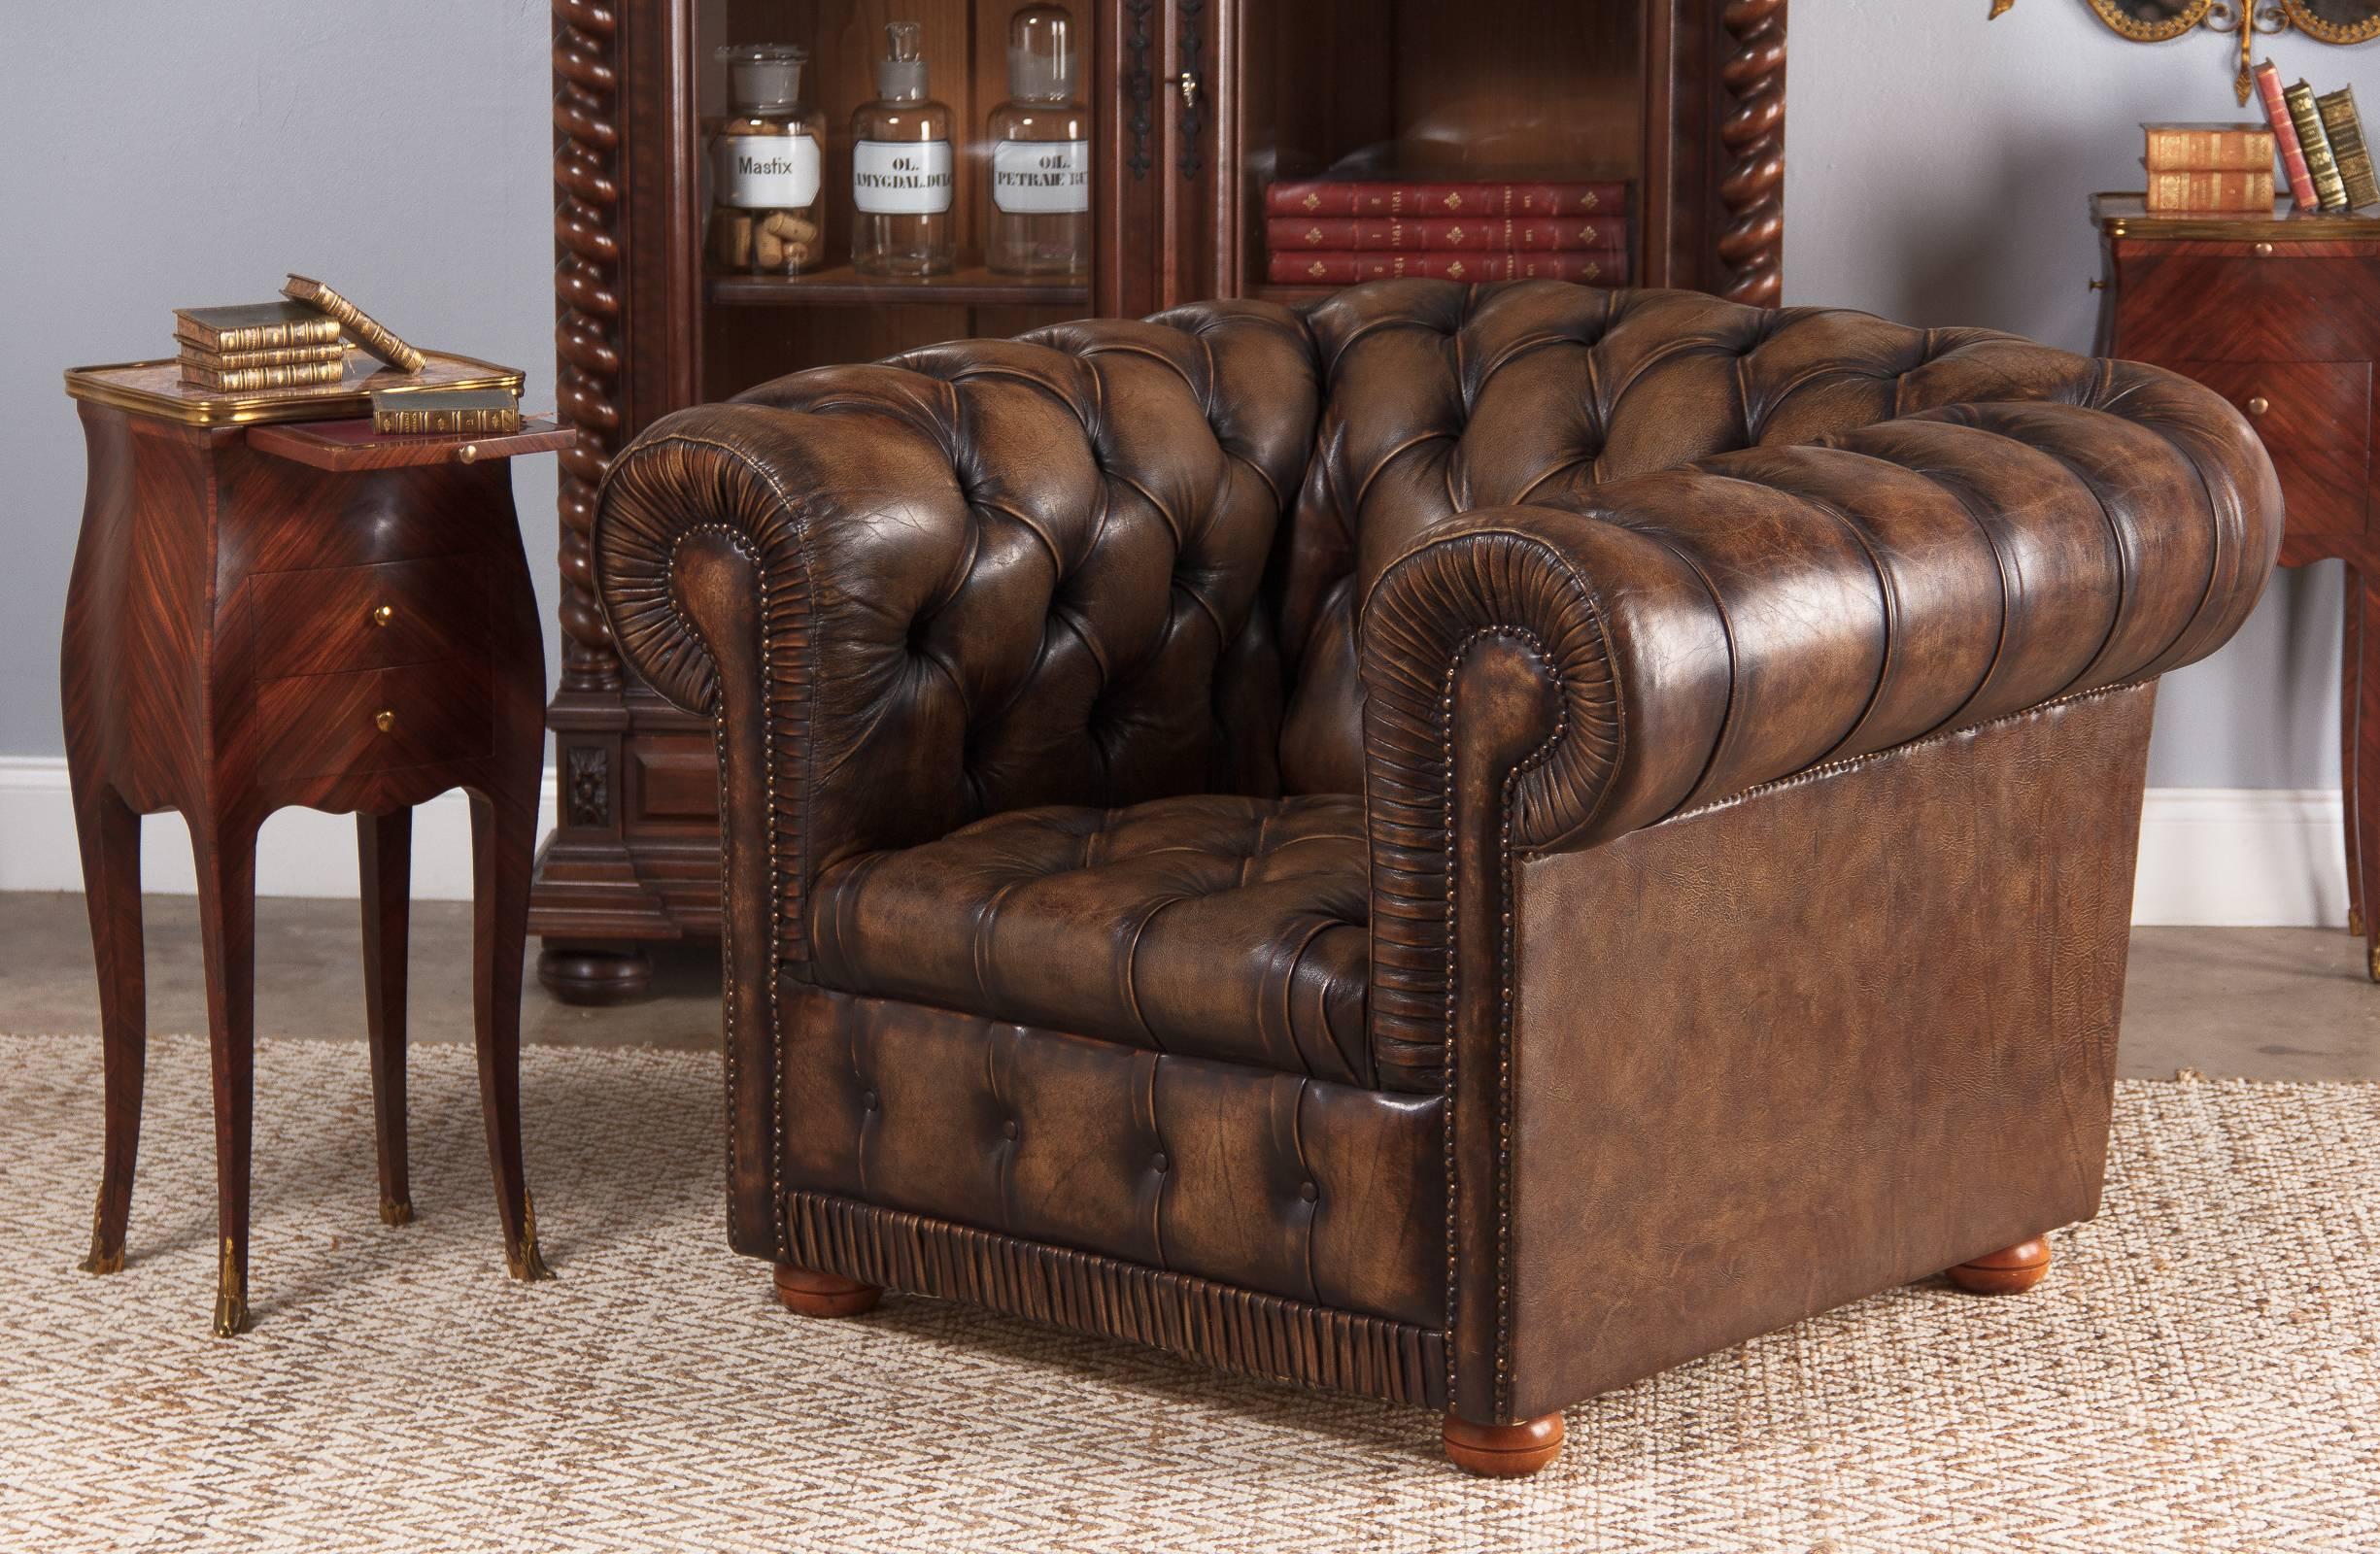 An excellent vintage Chesterfield leather armchair, circa 1960s. Beautifully conditioned brown leather, chocolate color at the tucks and buttons that fades to a light cocoa. Antique nailhead trim accentuates the chair's shape. Pleat tucks bring